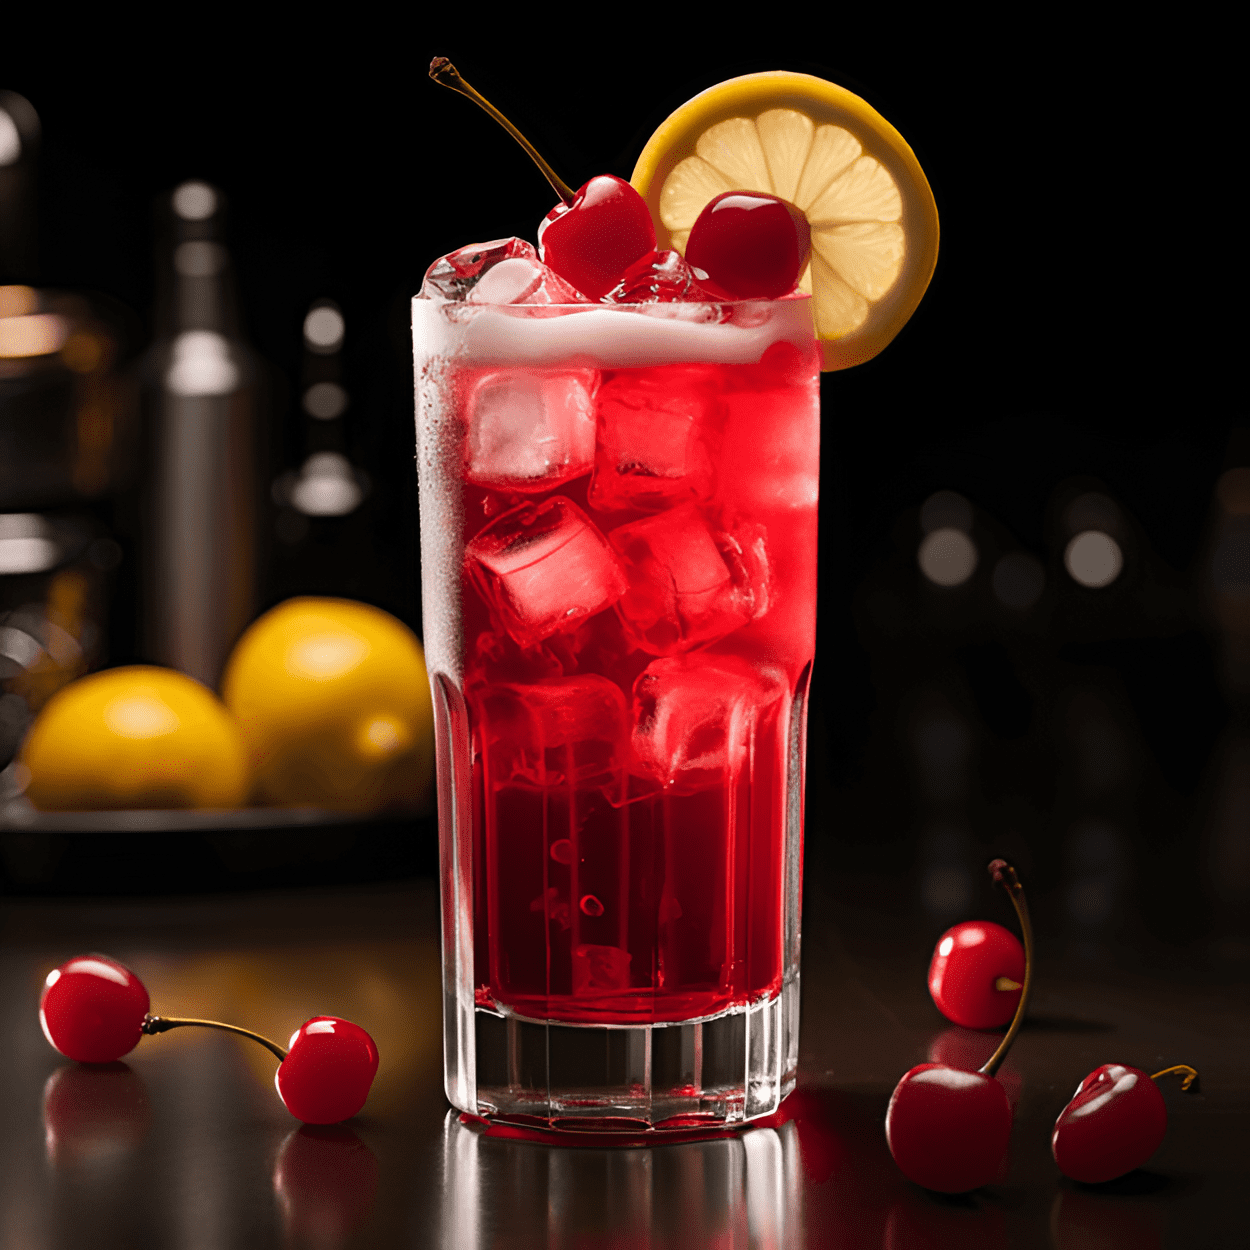 Long Beach Iced Tea Cocktail Recipe - The Long Beach Iced Tea is a delightful mix of sweet, sour, and strong. The sweetness of the cranberry juice balances the tartness of the citrus, while the various spirits combine to give it a potent kick. Despite its strength, it's surprisingly refreshing and easy to drink.